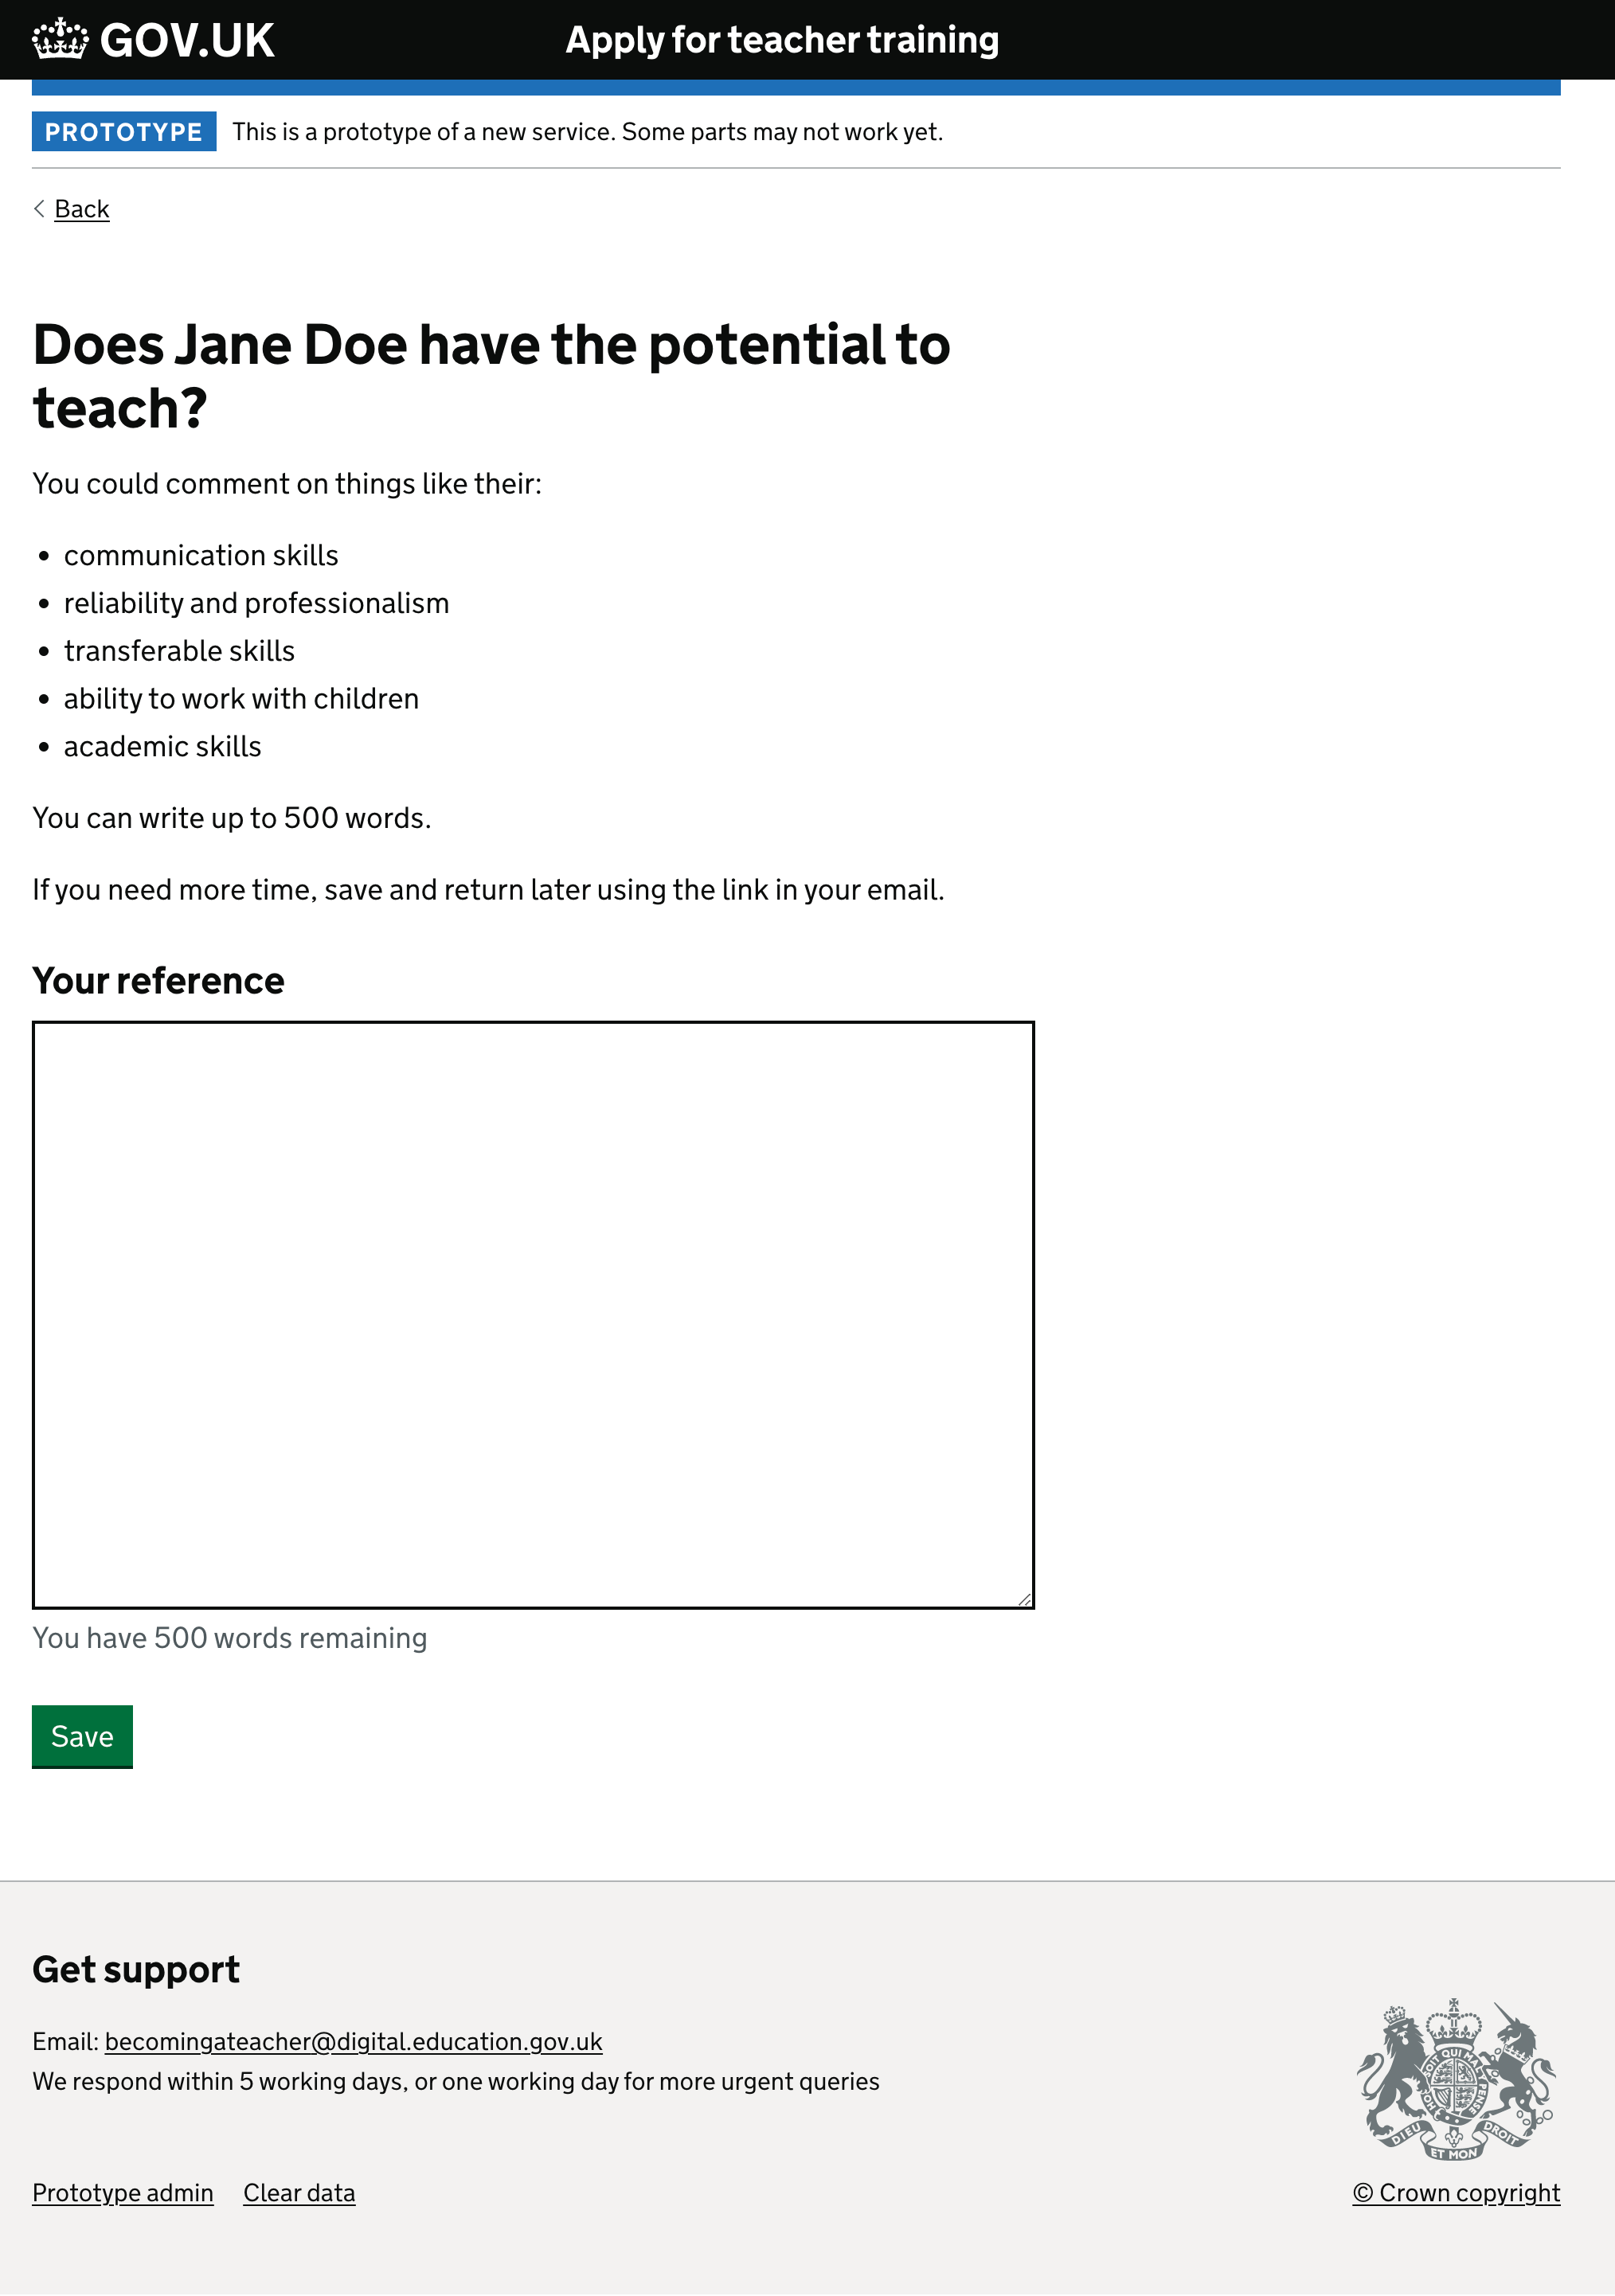 Screenshot showing a page asking ‘Does Jane Doe have the potential to teach?’